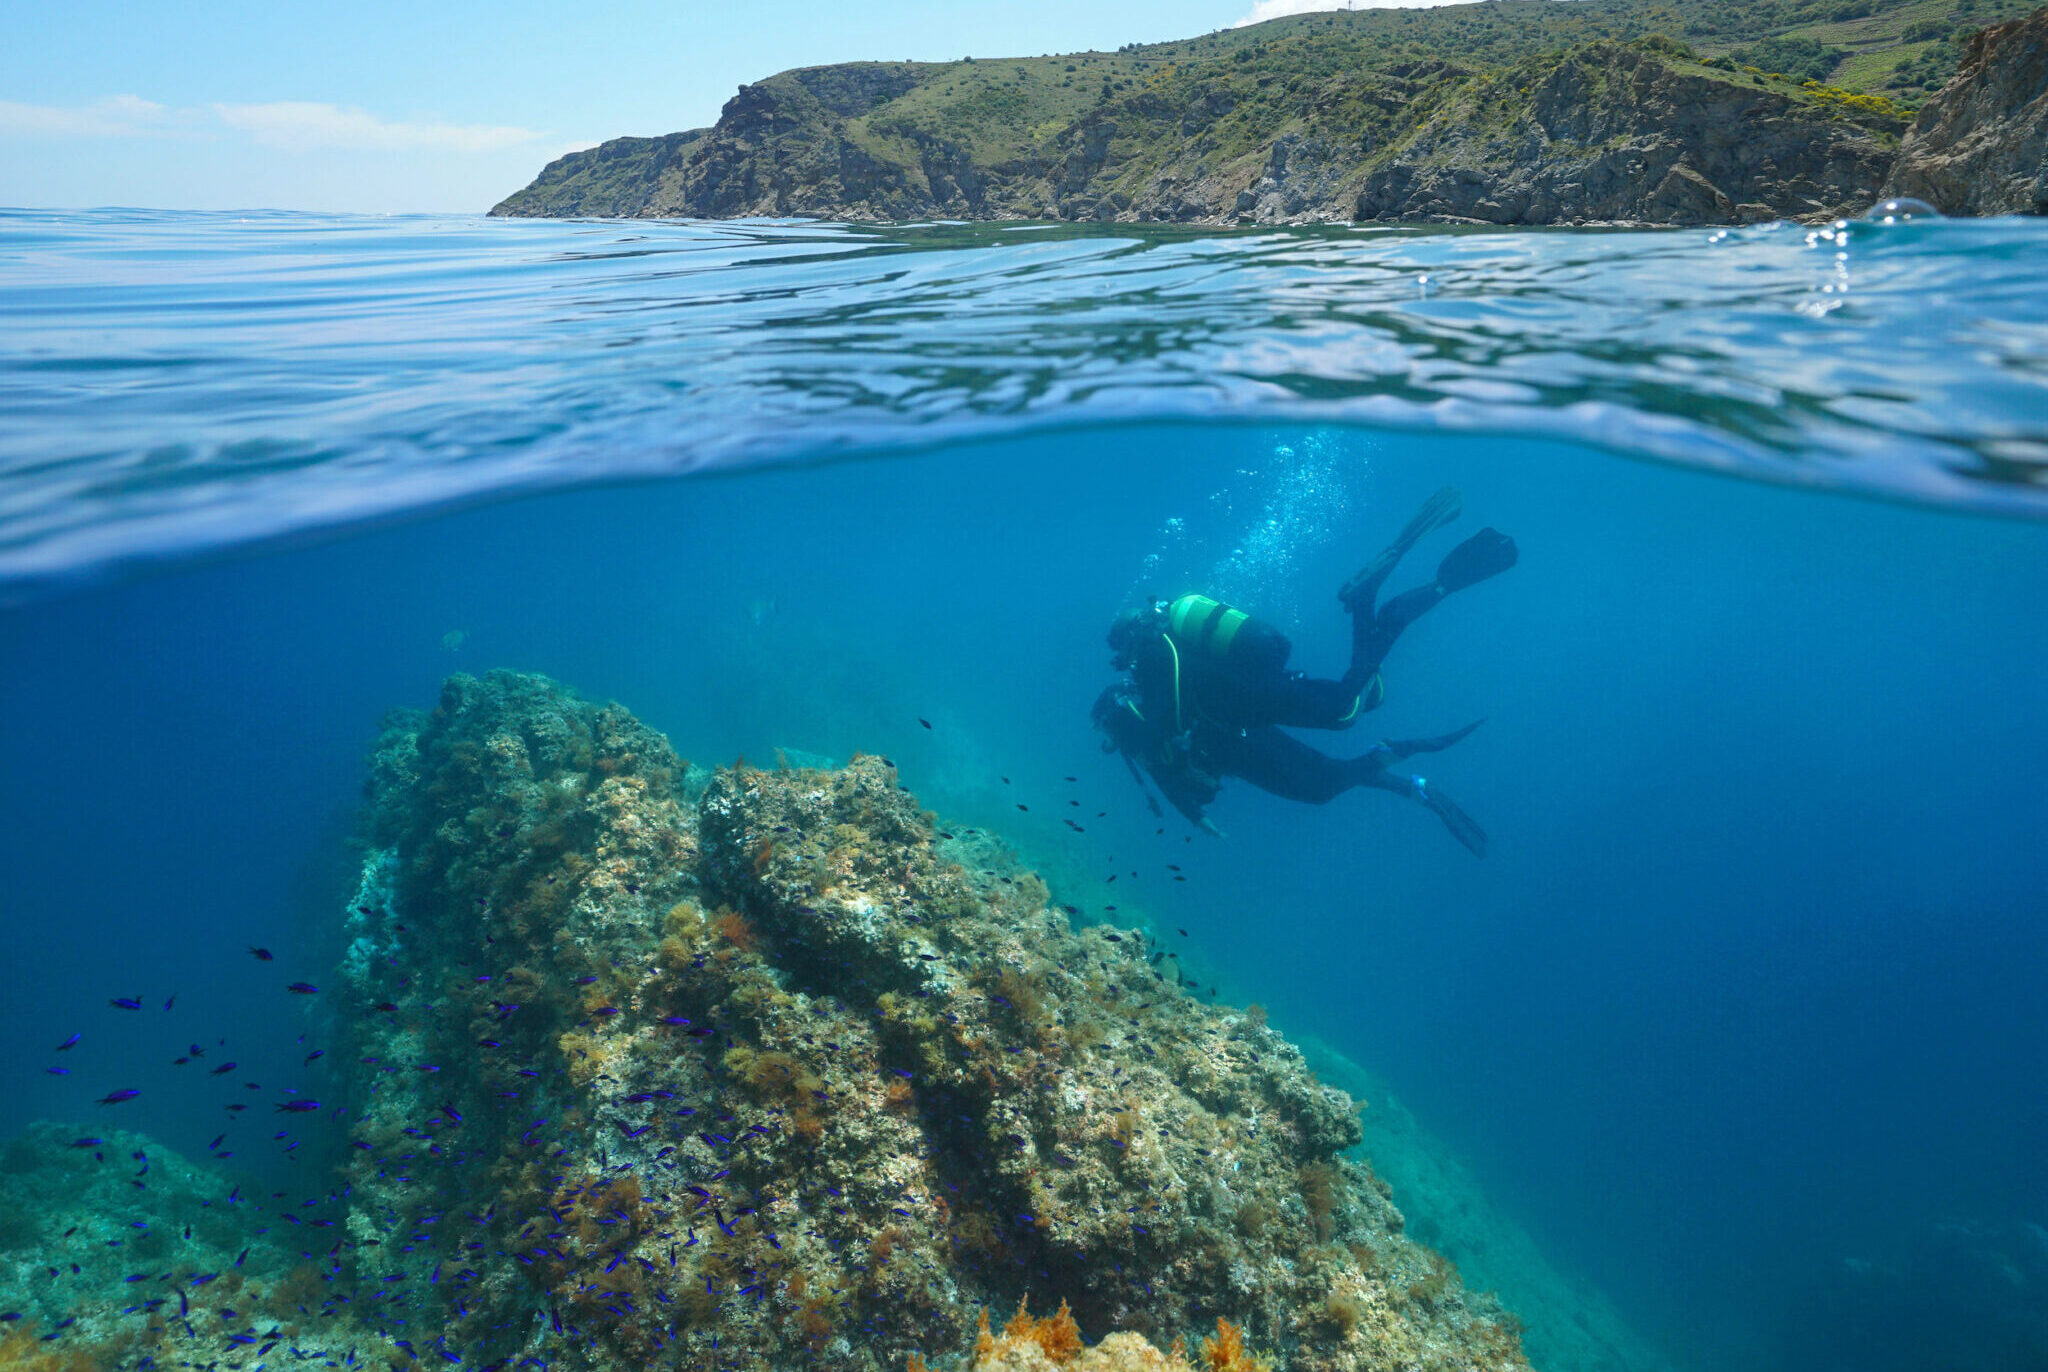 France is a top dive travel destination for Brits